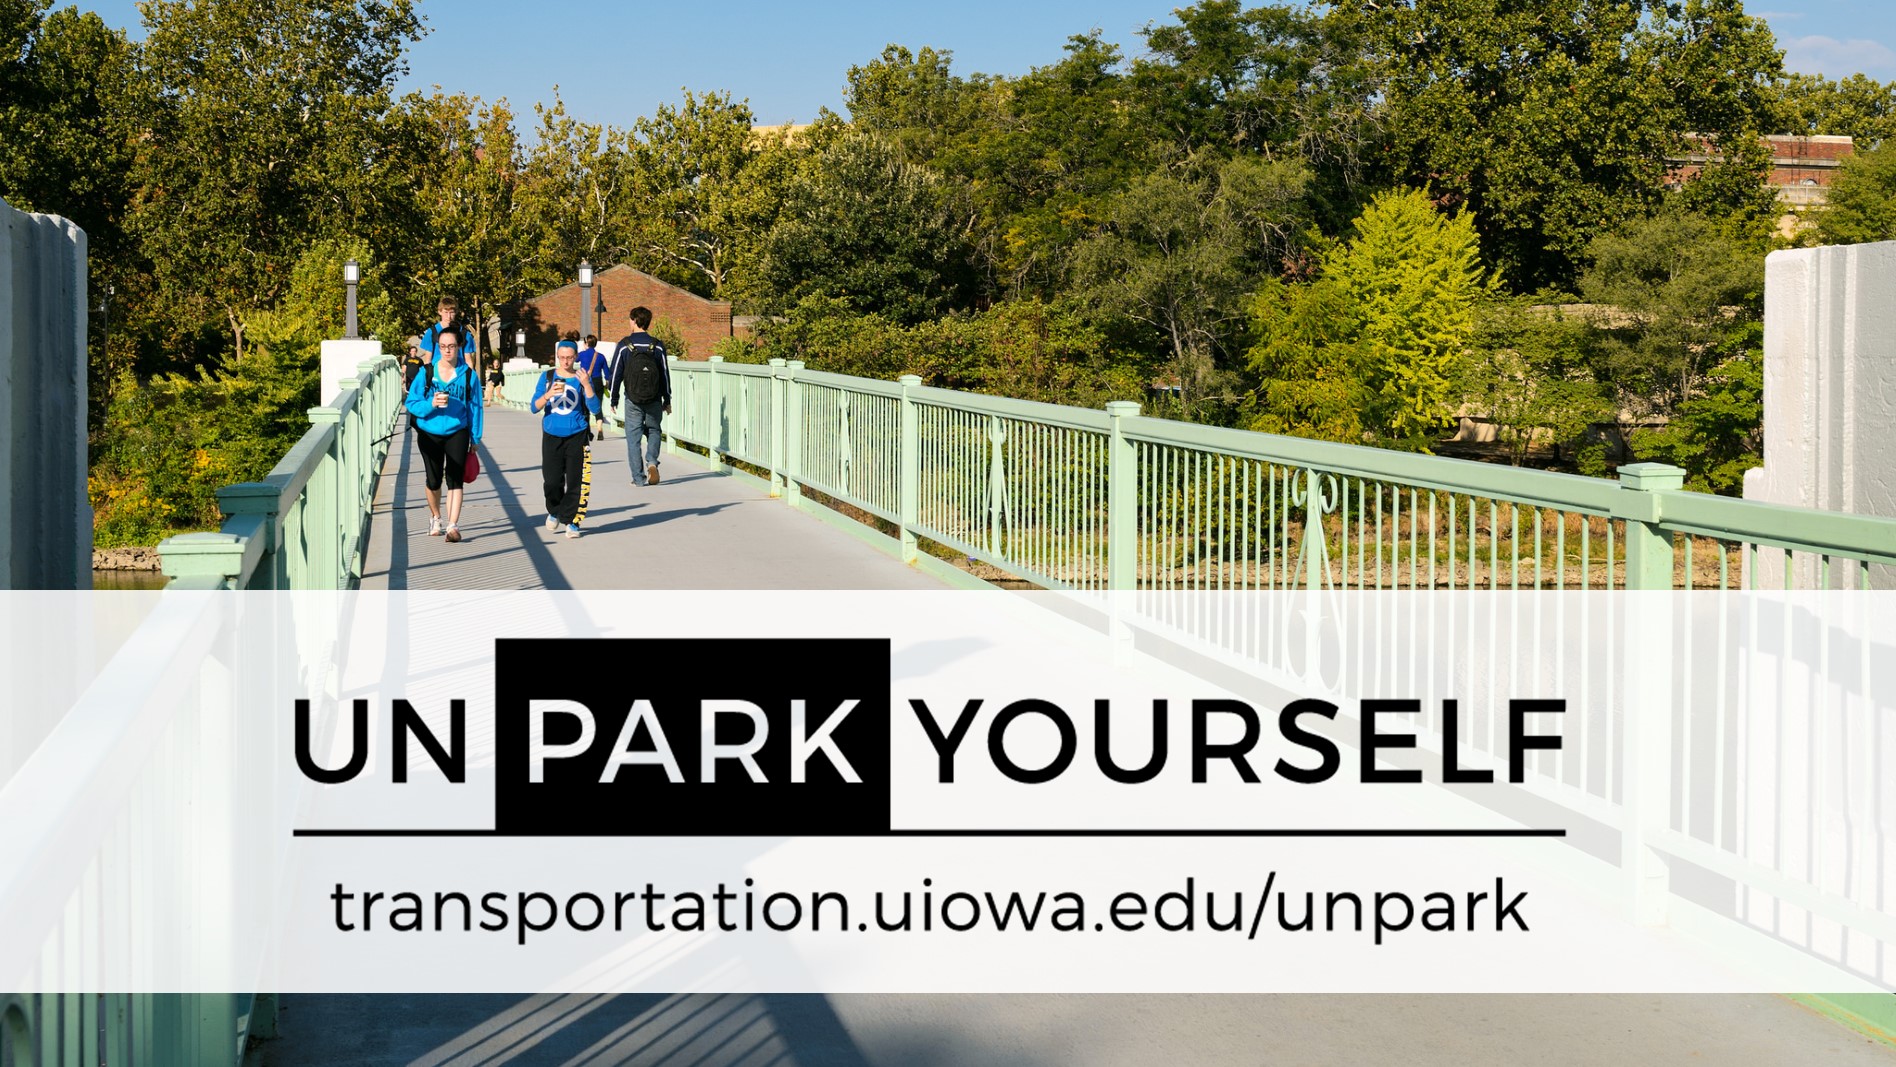 Unpark yourself by walking, biking, busing, and carpooling